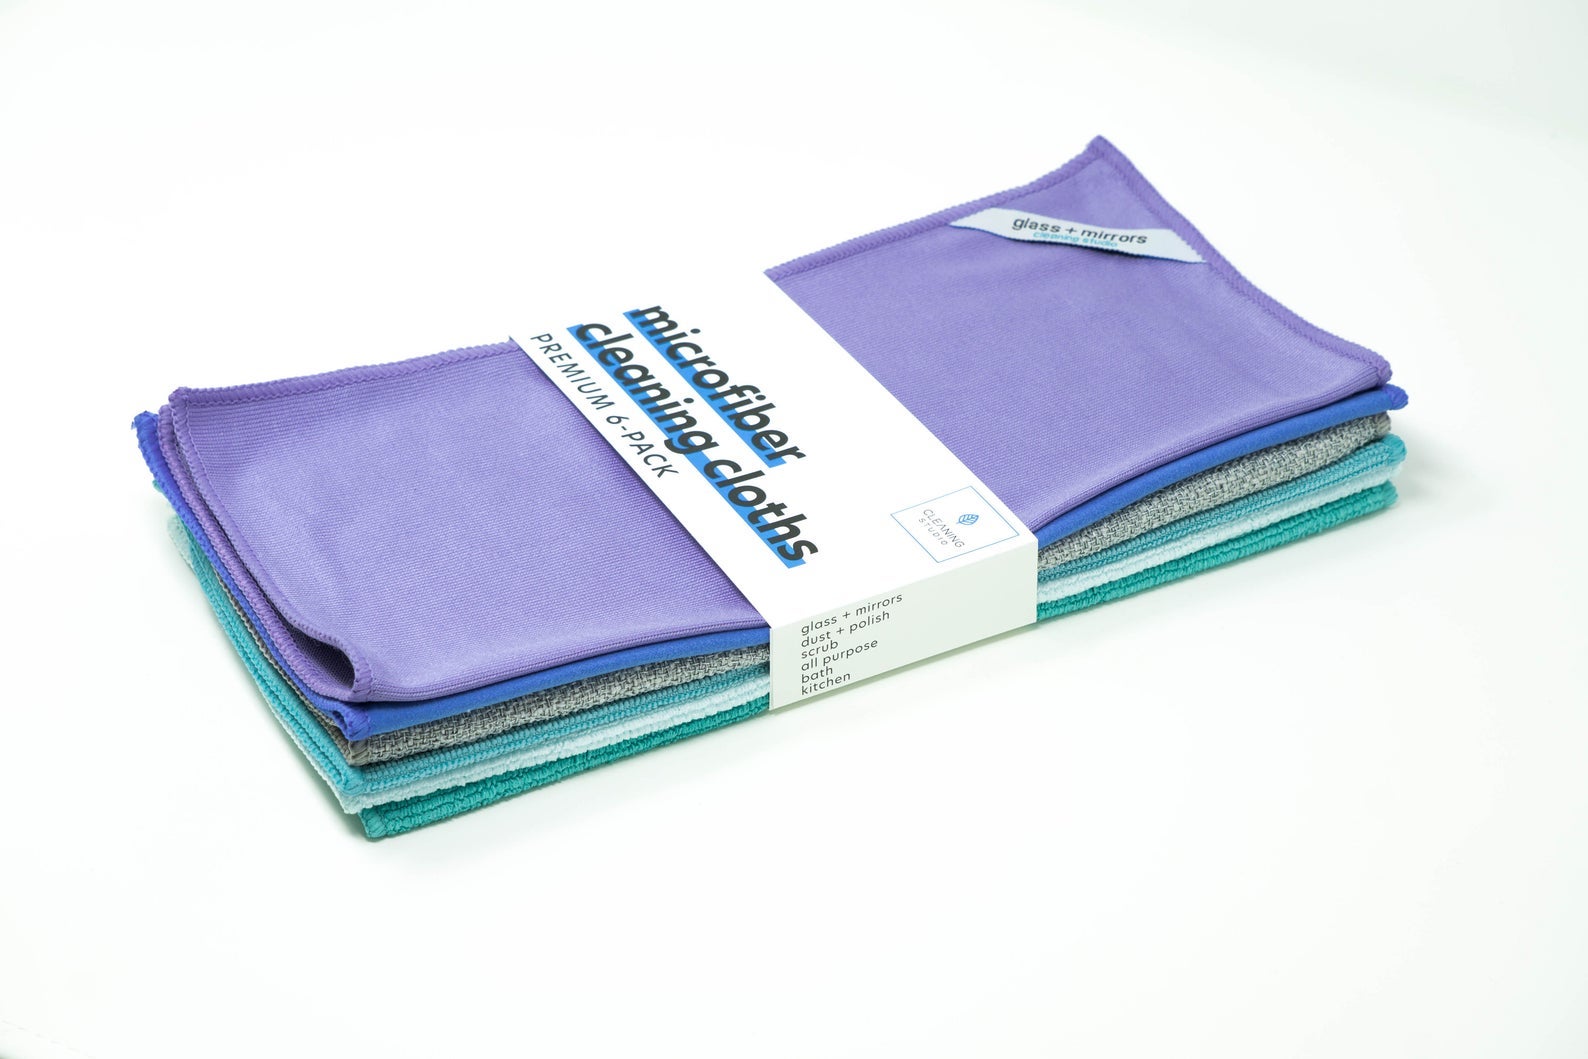 A stack of six microfiber cloths in different colors